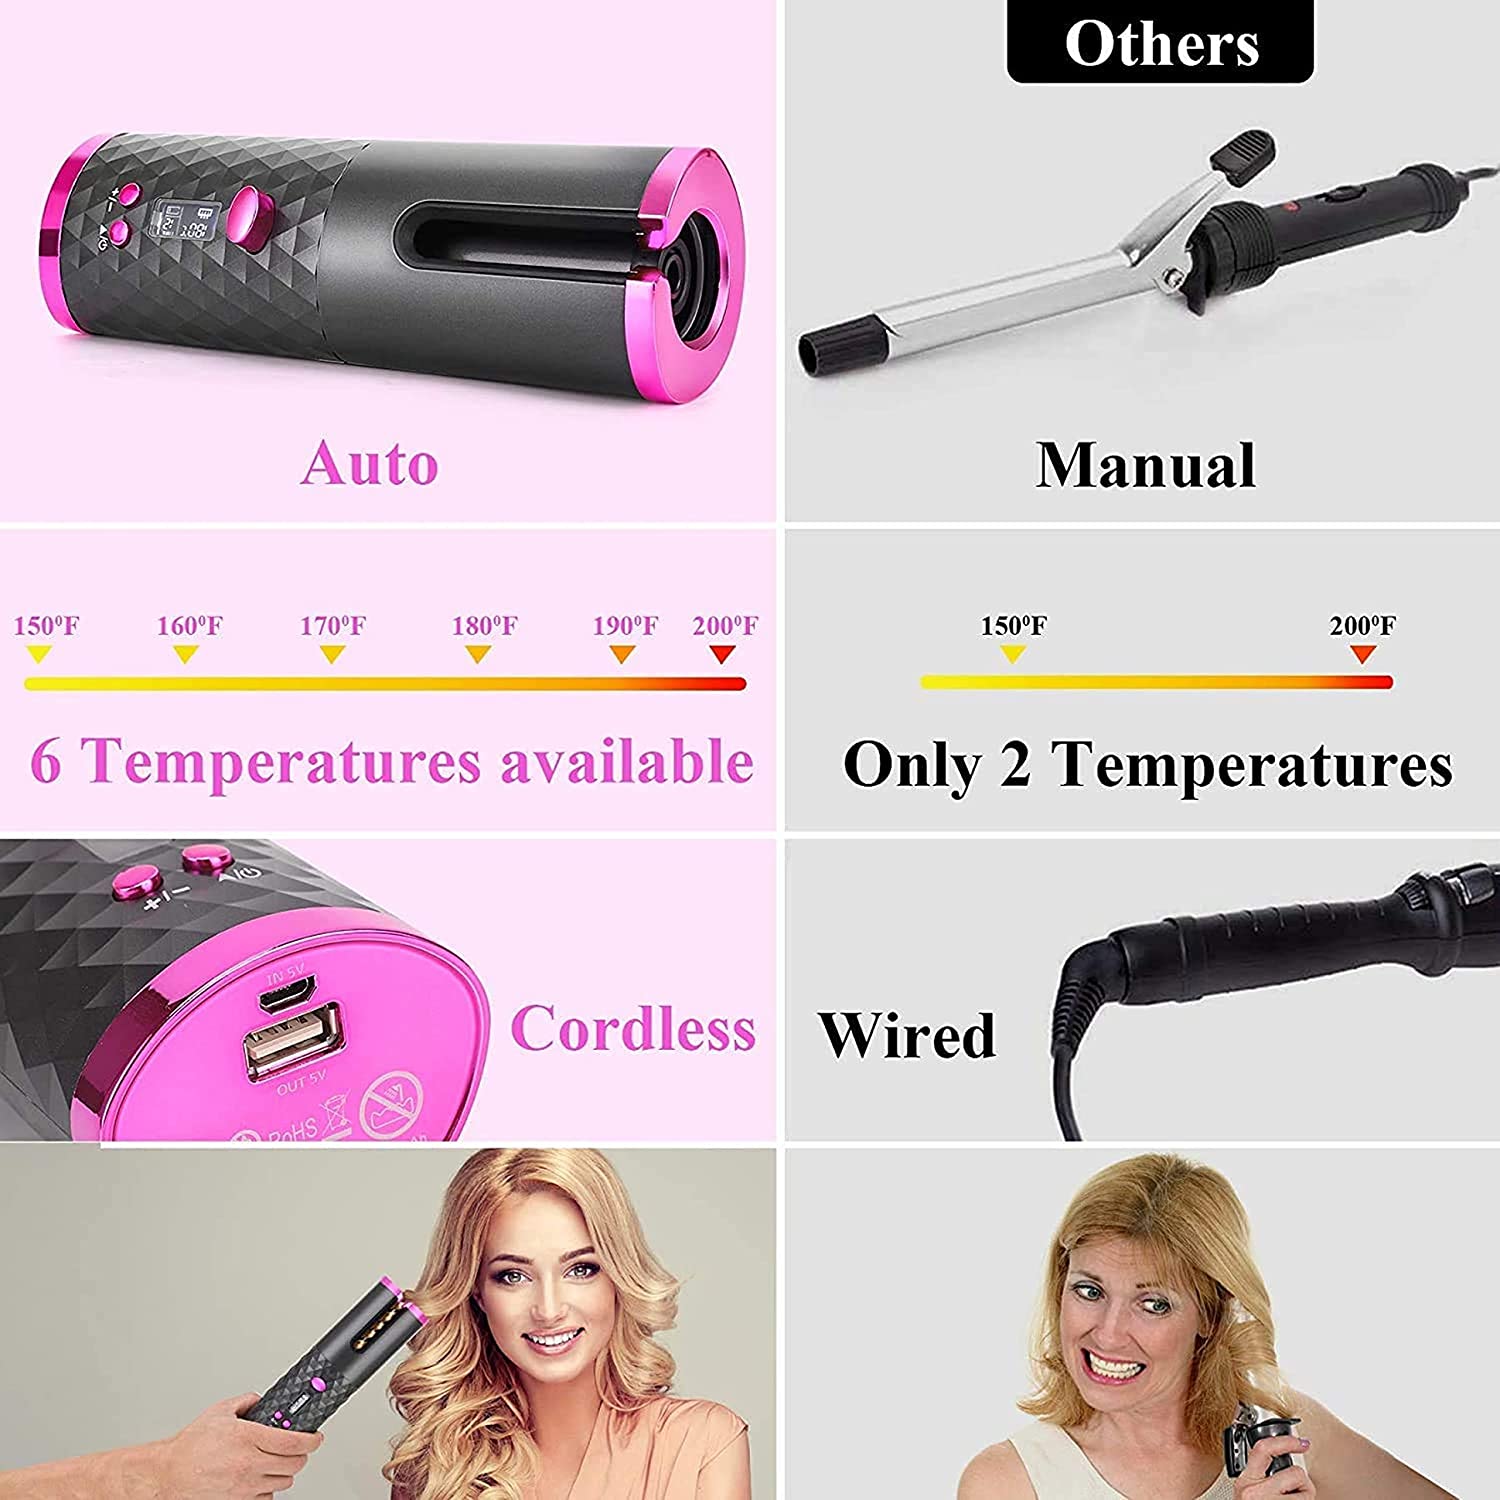 Veentus-Dealsure-Hair-Curler-Hair-Curling-Iron-Cordless-Automatic-Curler-Silky-Curls-Fast-Heating-Wireless-Auto-Curler-with-Timer-Setting-and-6-Temperature6.jpg